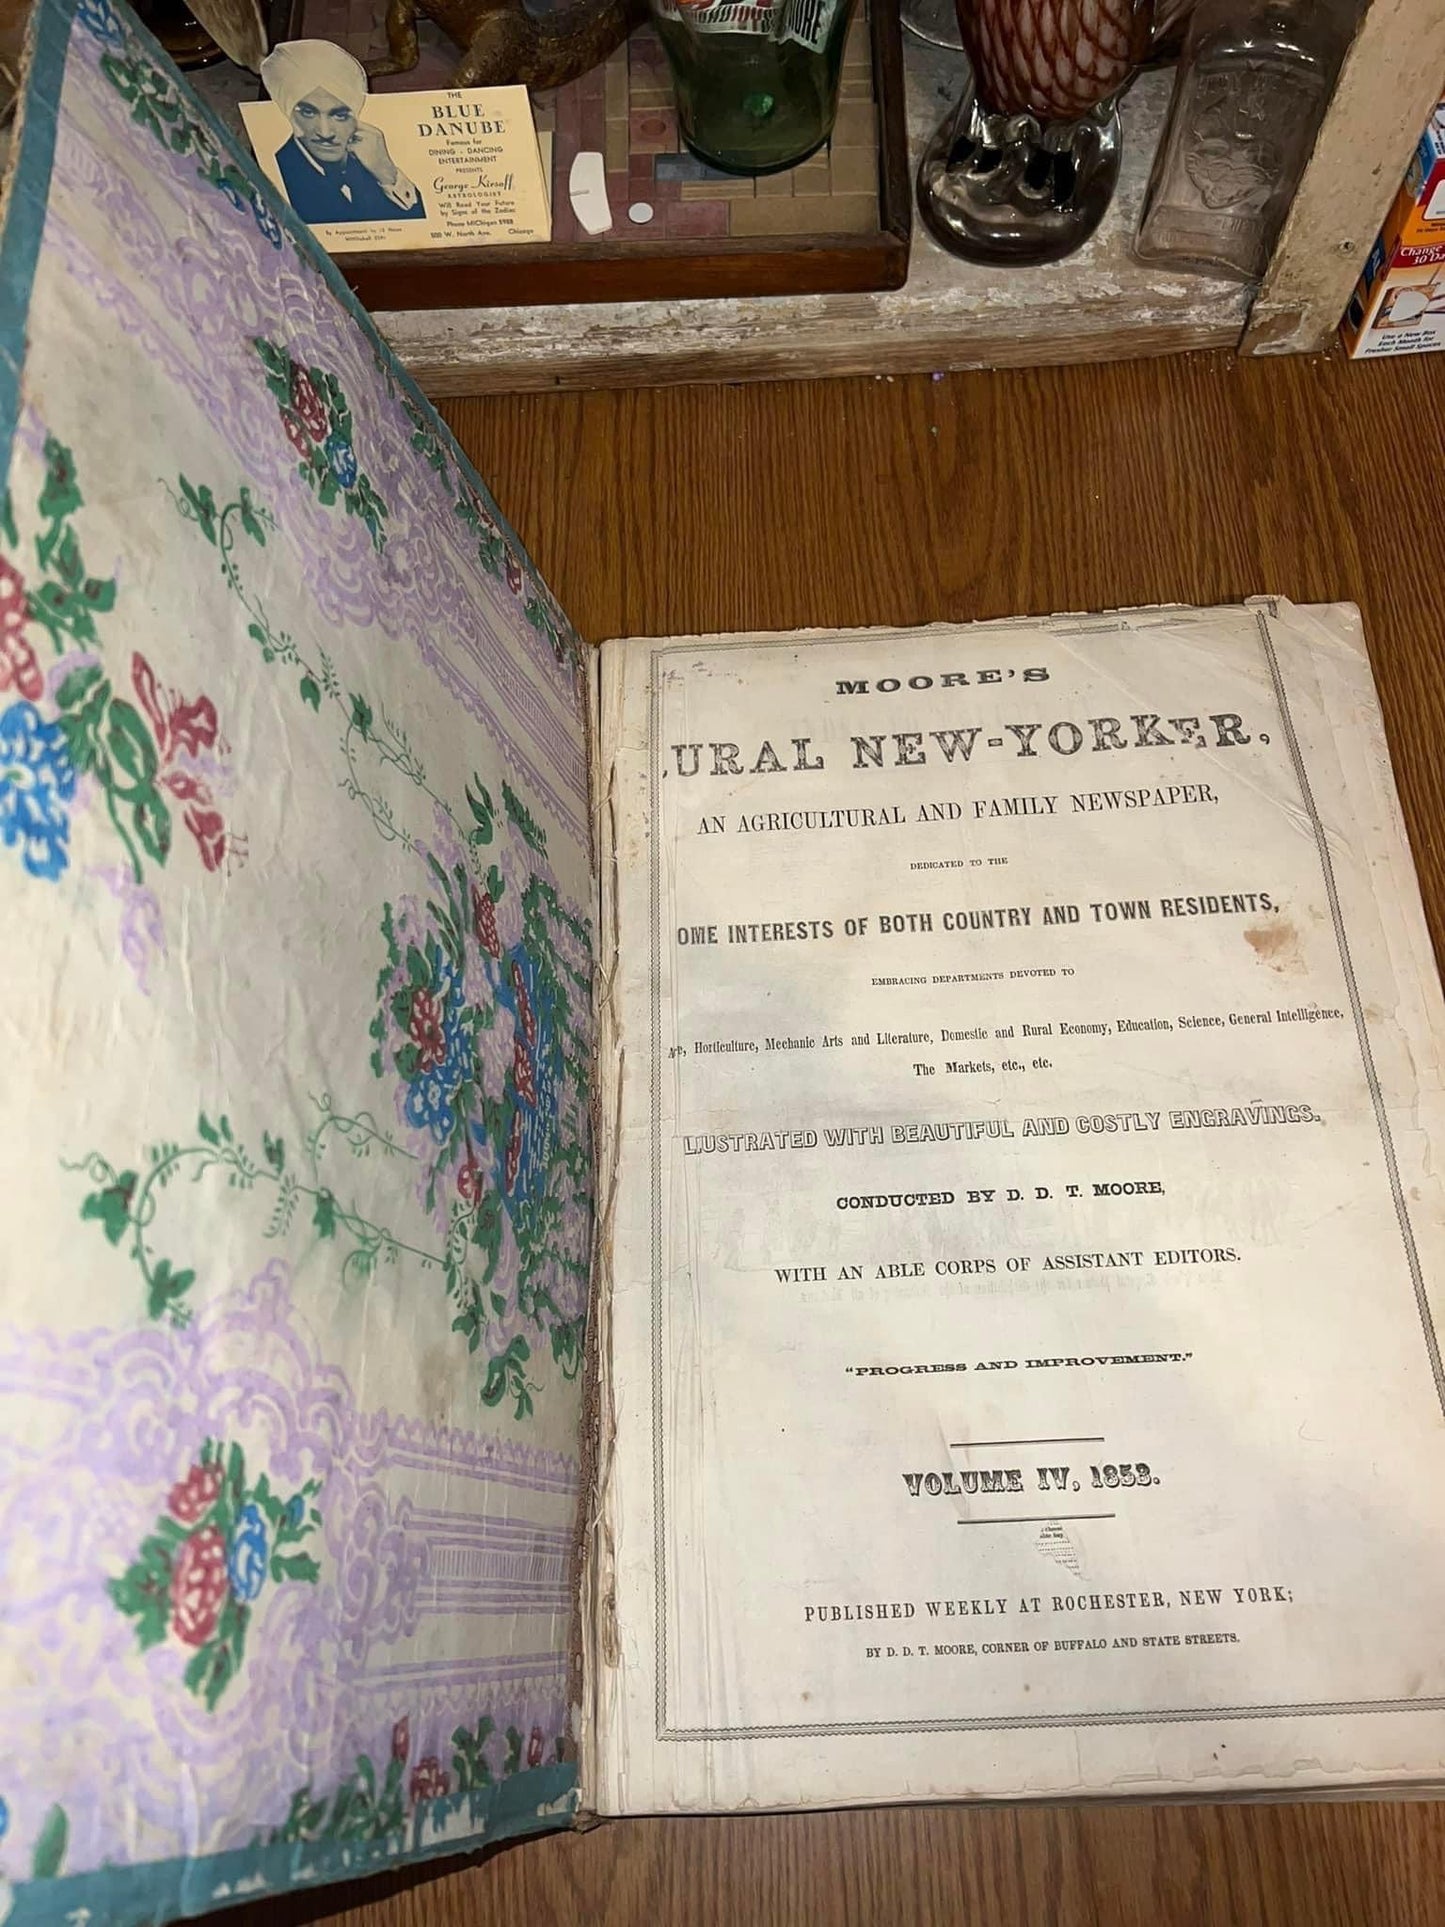 Antique pre civil war 1850s - 2 bound periodicals

Moores - the rural New Yorker

An agricultural and family newspaper